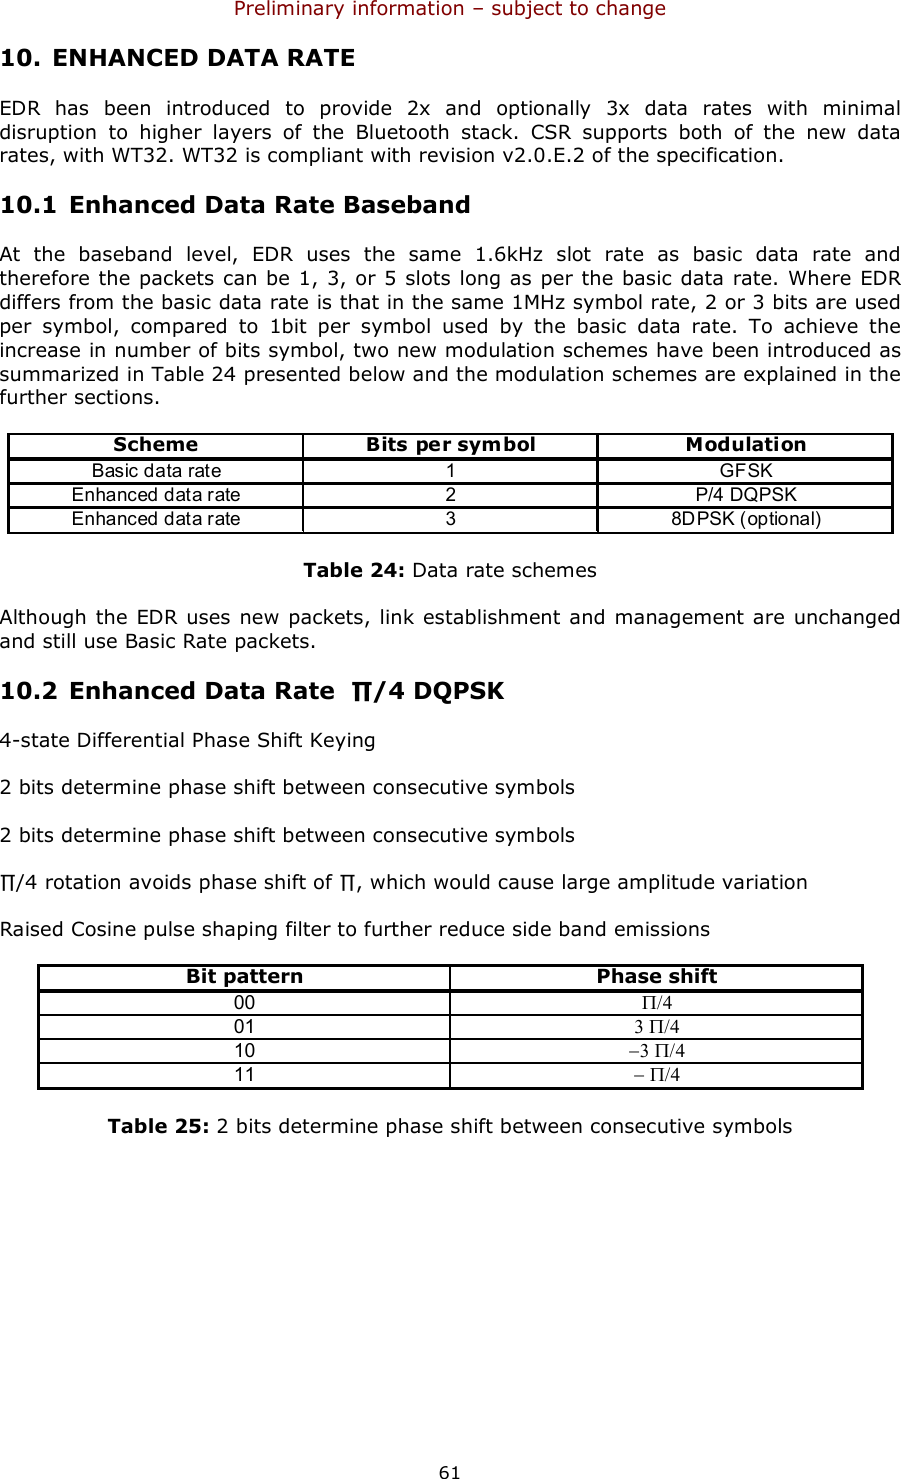 Preliminary information – subject to change  61 10. ENHANCED DATA RATE EDR  has  been  introduced  to  provide  2x  and  optionally  3x  data  rates  with  minimal disruption  to  higher  layers  of  the  Bluetooth  stack.  CSR  supports  both  of  the  new  data rates, with WT32. WT32 is compliant with revision v2.0.E.2 of the specification. 10.1 Enhanced Data Rate Baseband At  the  baseband  level,  EDR  uses  the  same  1.6kHz  slot  rate  as  basic  data  rate  and therefore the packets can be 1, 3, or 5 slots long as per the basic data rate. Where EDR differs from the basic data rate is that in the same 1MHz symbol rate, 2 or 3 bits are used per  symbol,  compared  to  1bit  per  symbol  used  by  the  basic  data  rate.  To  achieve  the increase in number of bits symbol, two new modulation schemes have been introduced as summarized in Table 24 presented below and the modulation schemes are explained in the further sections. SchemeBits per symbolModulationBasic data rate 1 GFSKEnhanced data rate 2 P/4 DQPSKEnhanced data rate 3 8DPSK (optional) Table 24: Data rate schemes Although the EDR uses new packets, link establishment and management are unchanged and still use Basic Rate packets. 10.2 Enhanced Data Rate  ∏/4 DQPSK 4-state Differential Phase Shift Keying 2 bits determine phase shift between consecutive symbols 2 bits determine phase shift between consecutive symbols ∏/4 rotation avoids phase shift of ∏, which would cause large amplitude variation Raised Cosine pulse shaping filter to further reduce side band emissions Bit patternPhase shift00Π/4013 Π/410−3 Π/411− Π/4 Table 25: 2 bits determine phase shift between consecutive symbols 